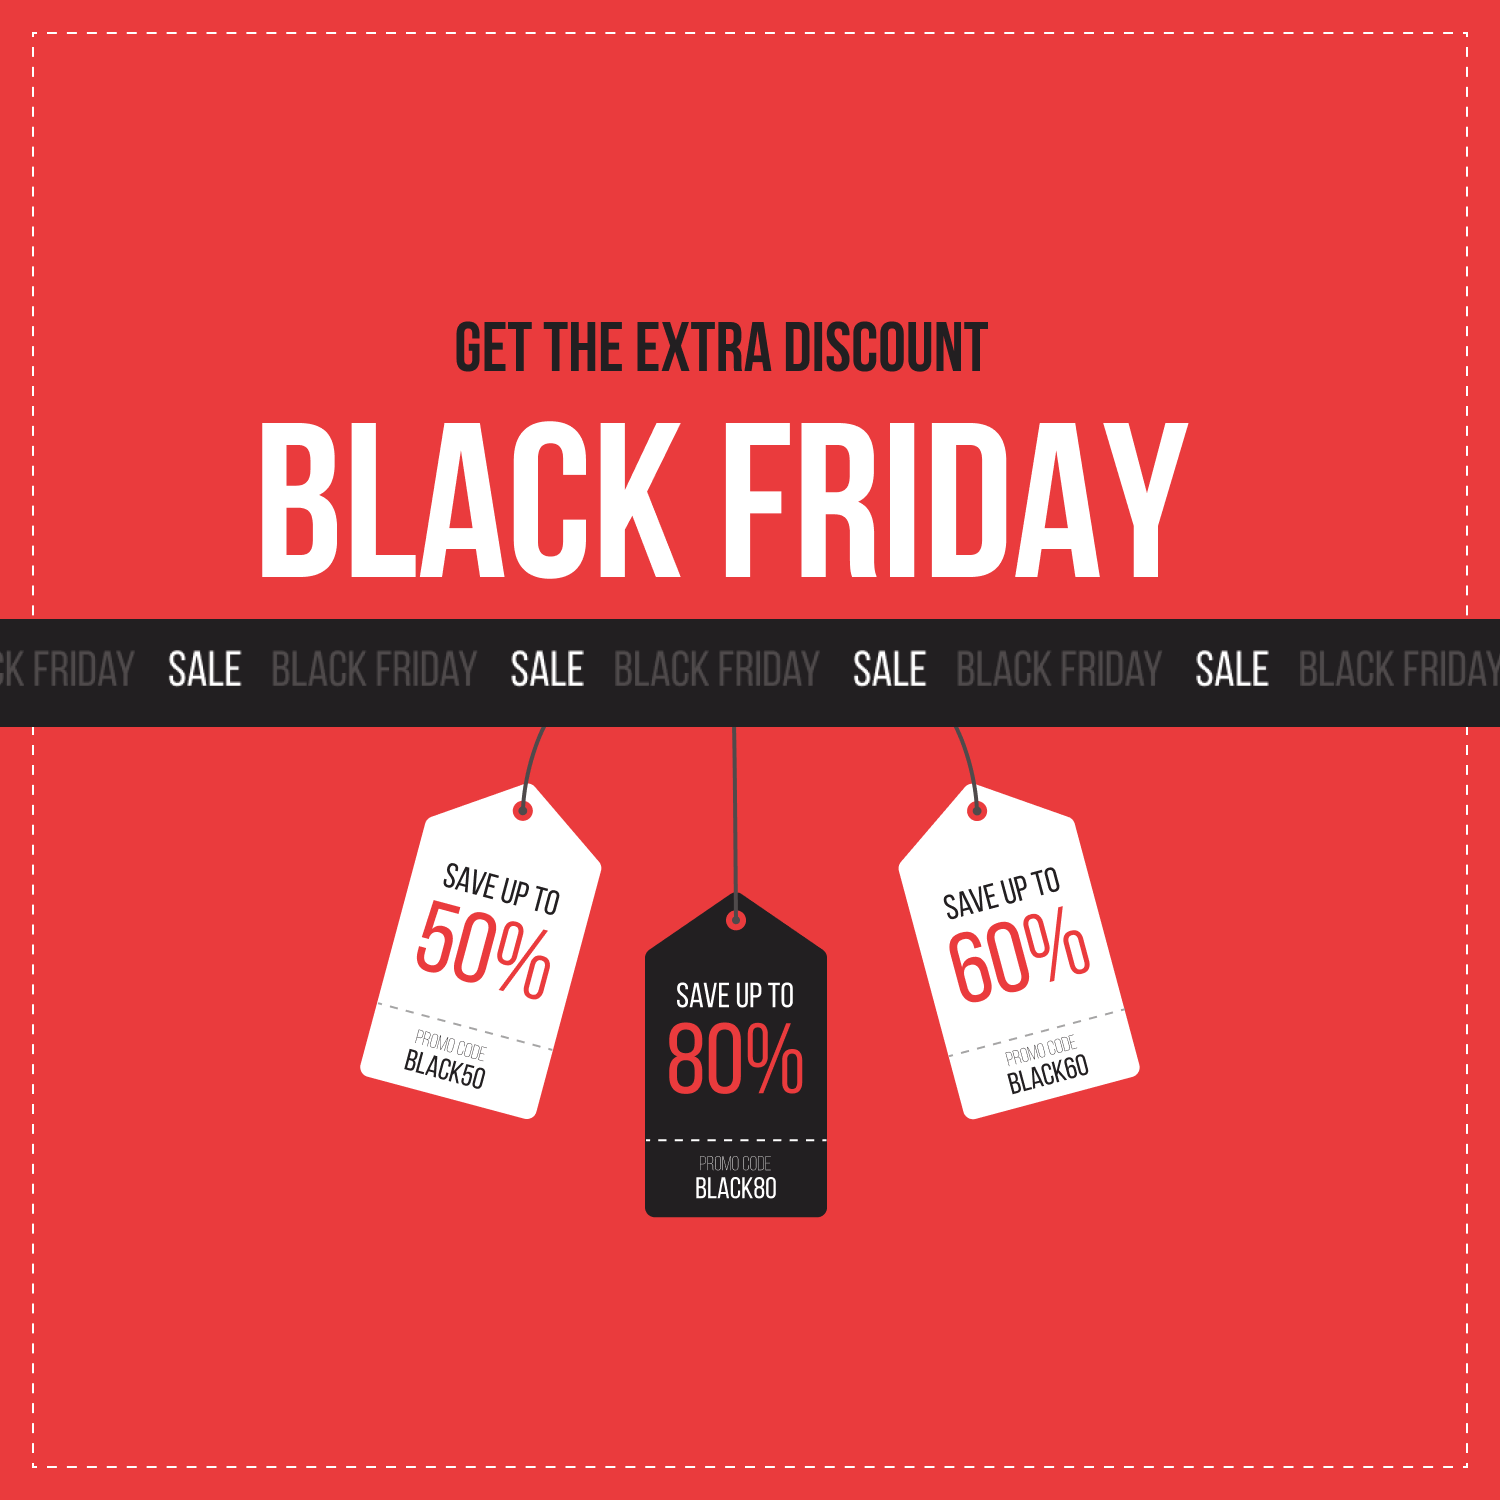 Red Black Friday Promo Designs cover image.